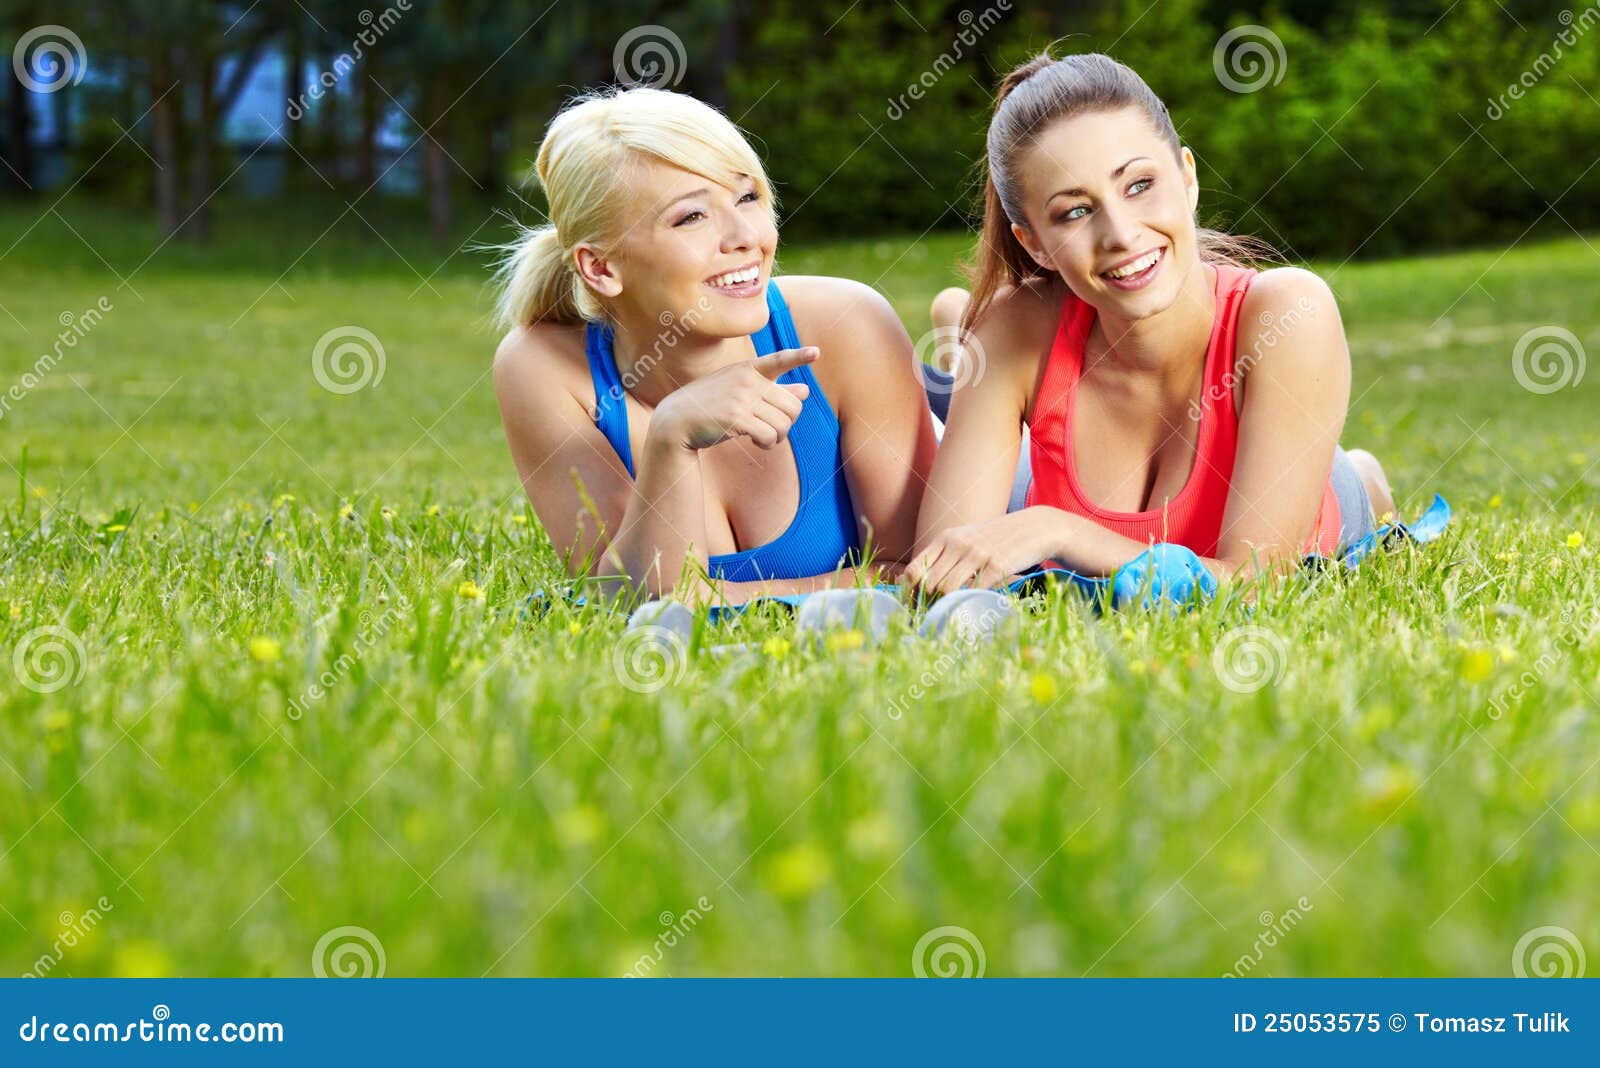 Two Fitness Girls Outdoor Stock Image Image Of Lifestyle 25053575